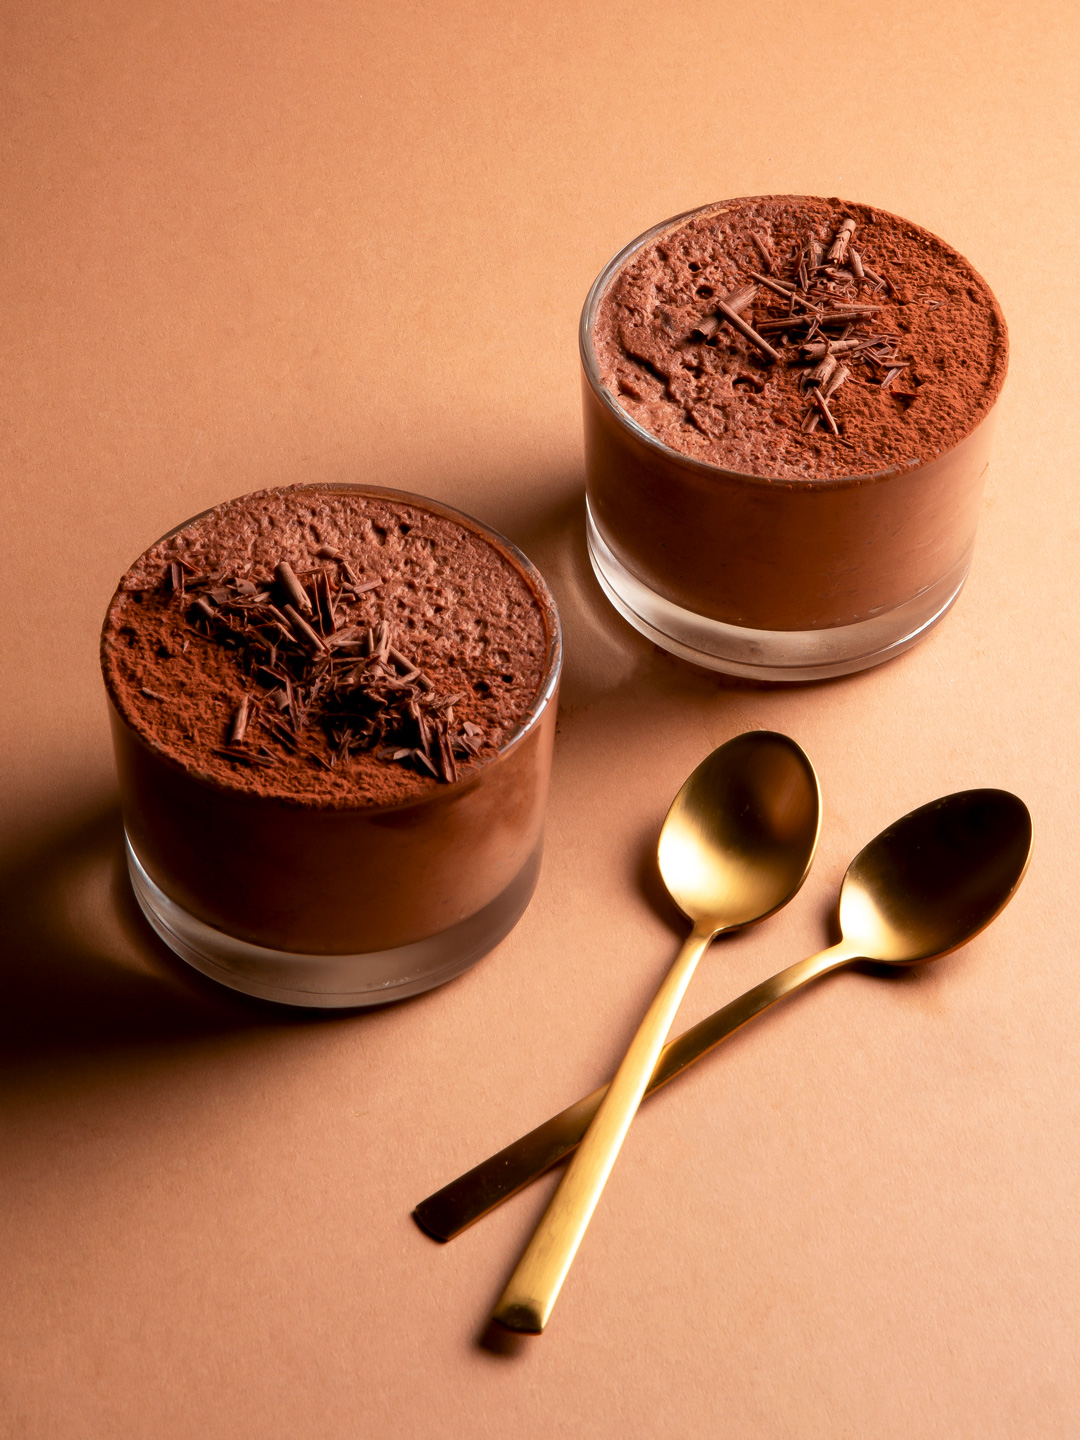 2 servings of chocolate mousse, garnished with chocolate shavings and powder